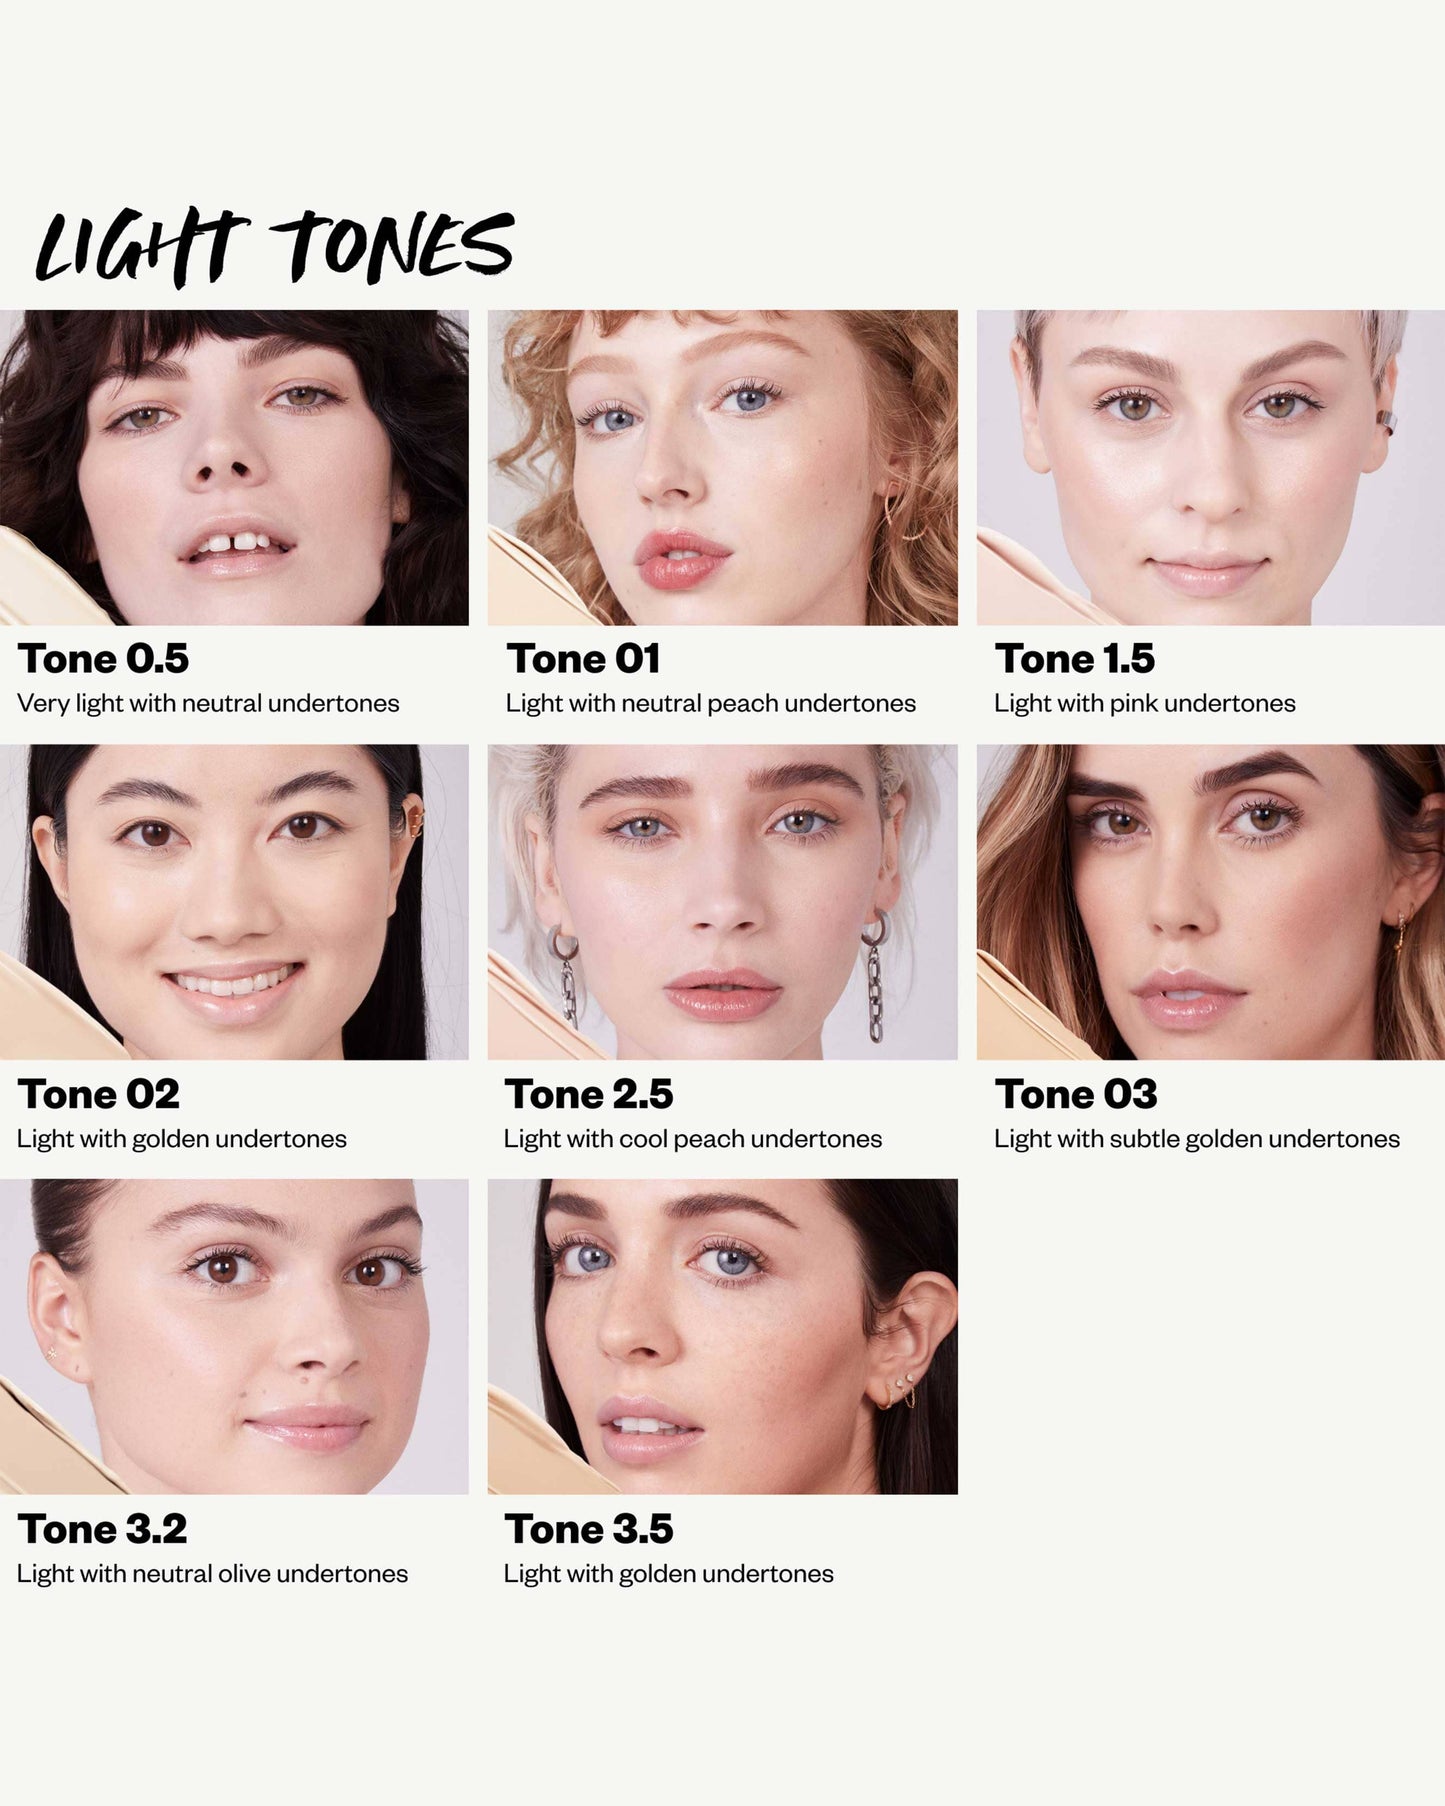 Tone 3.2 O (light with neutral olive undertones)